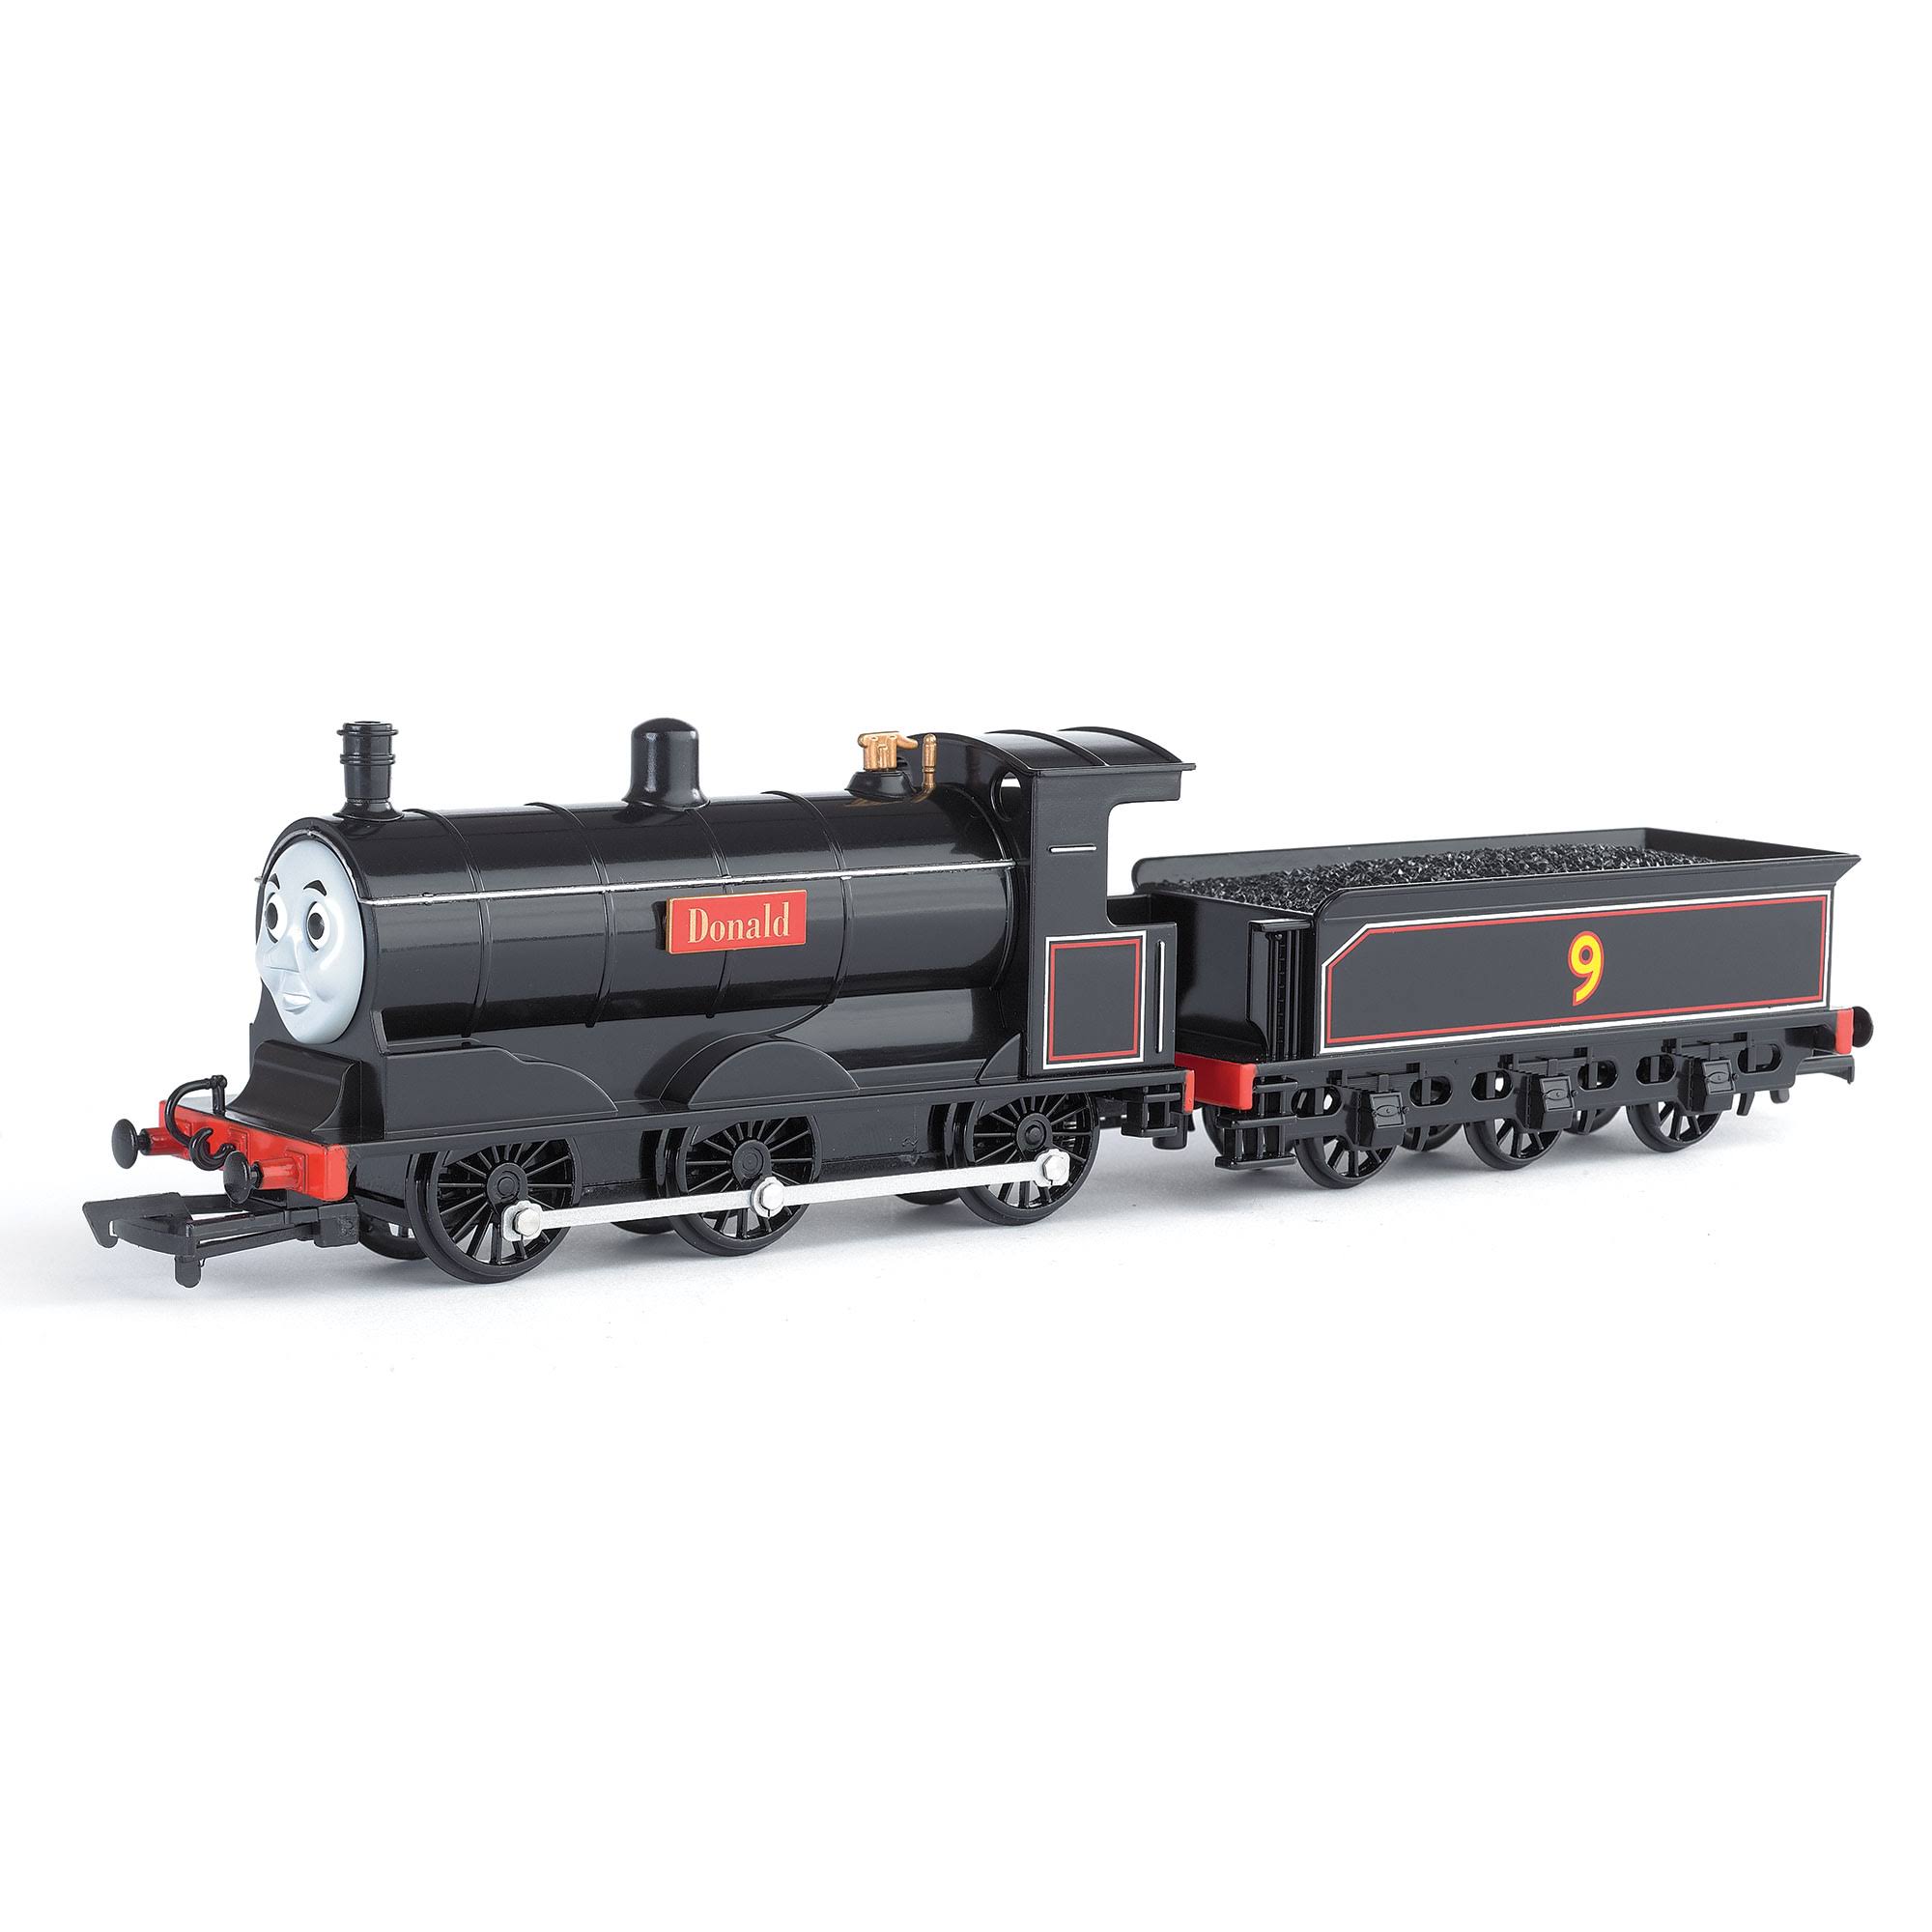 Bachmann Trains Thomas and Friends HO Scale Train - Donald Engine With Moving Eyes